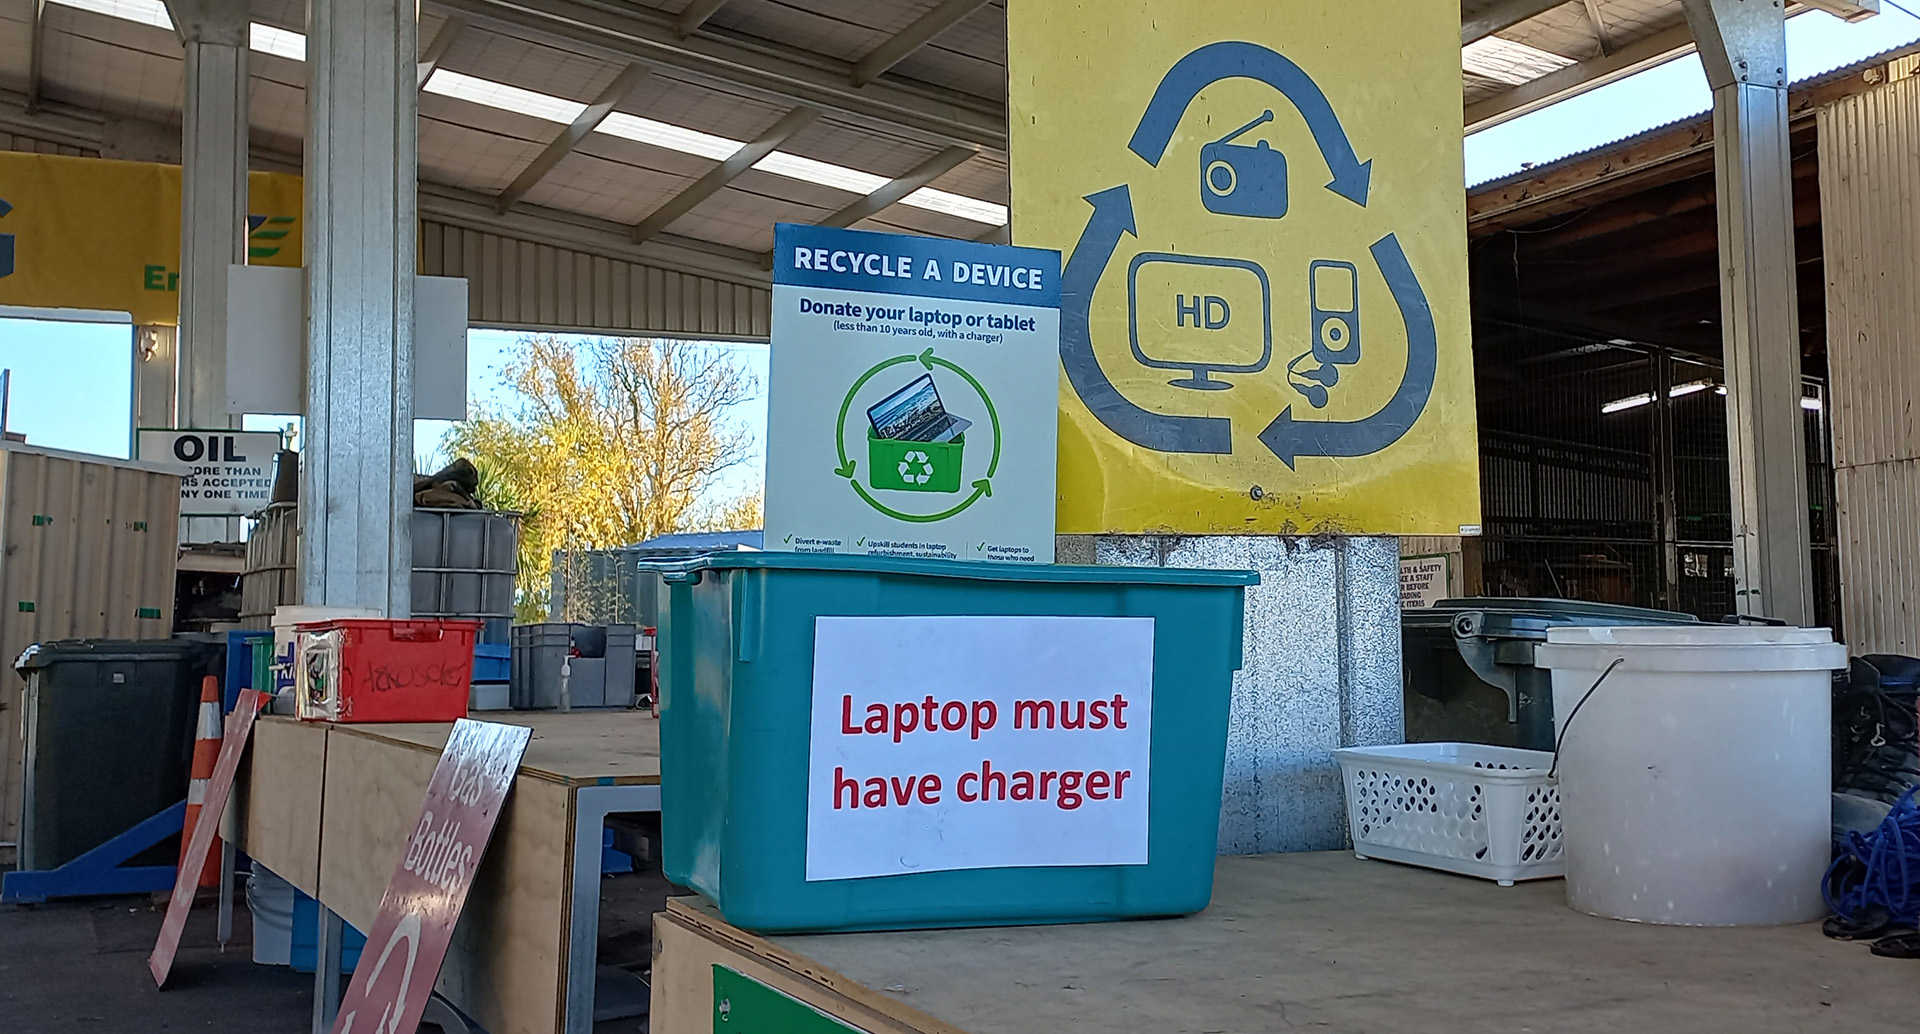 Sign for recycling laptops